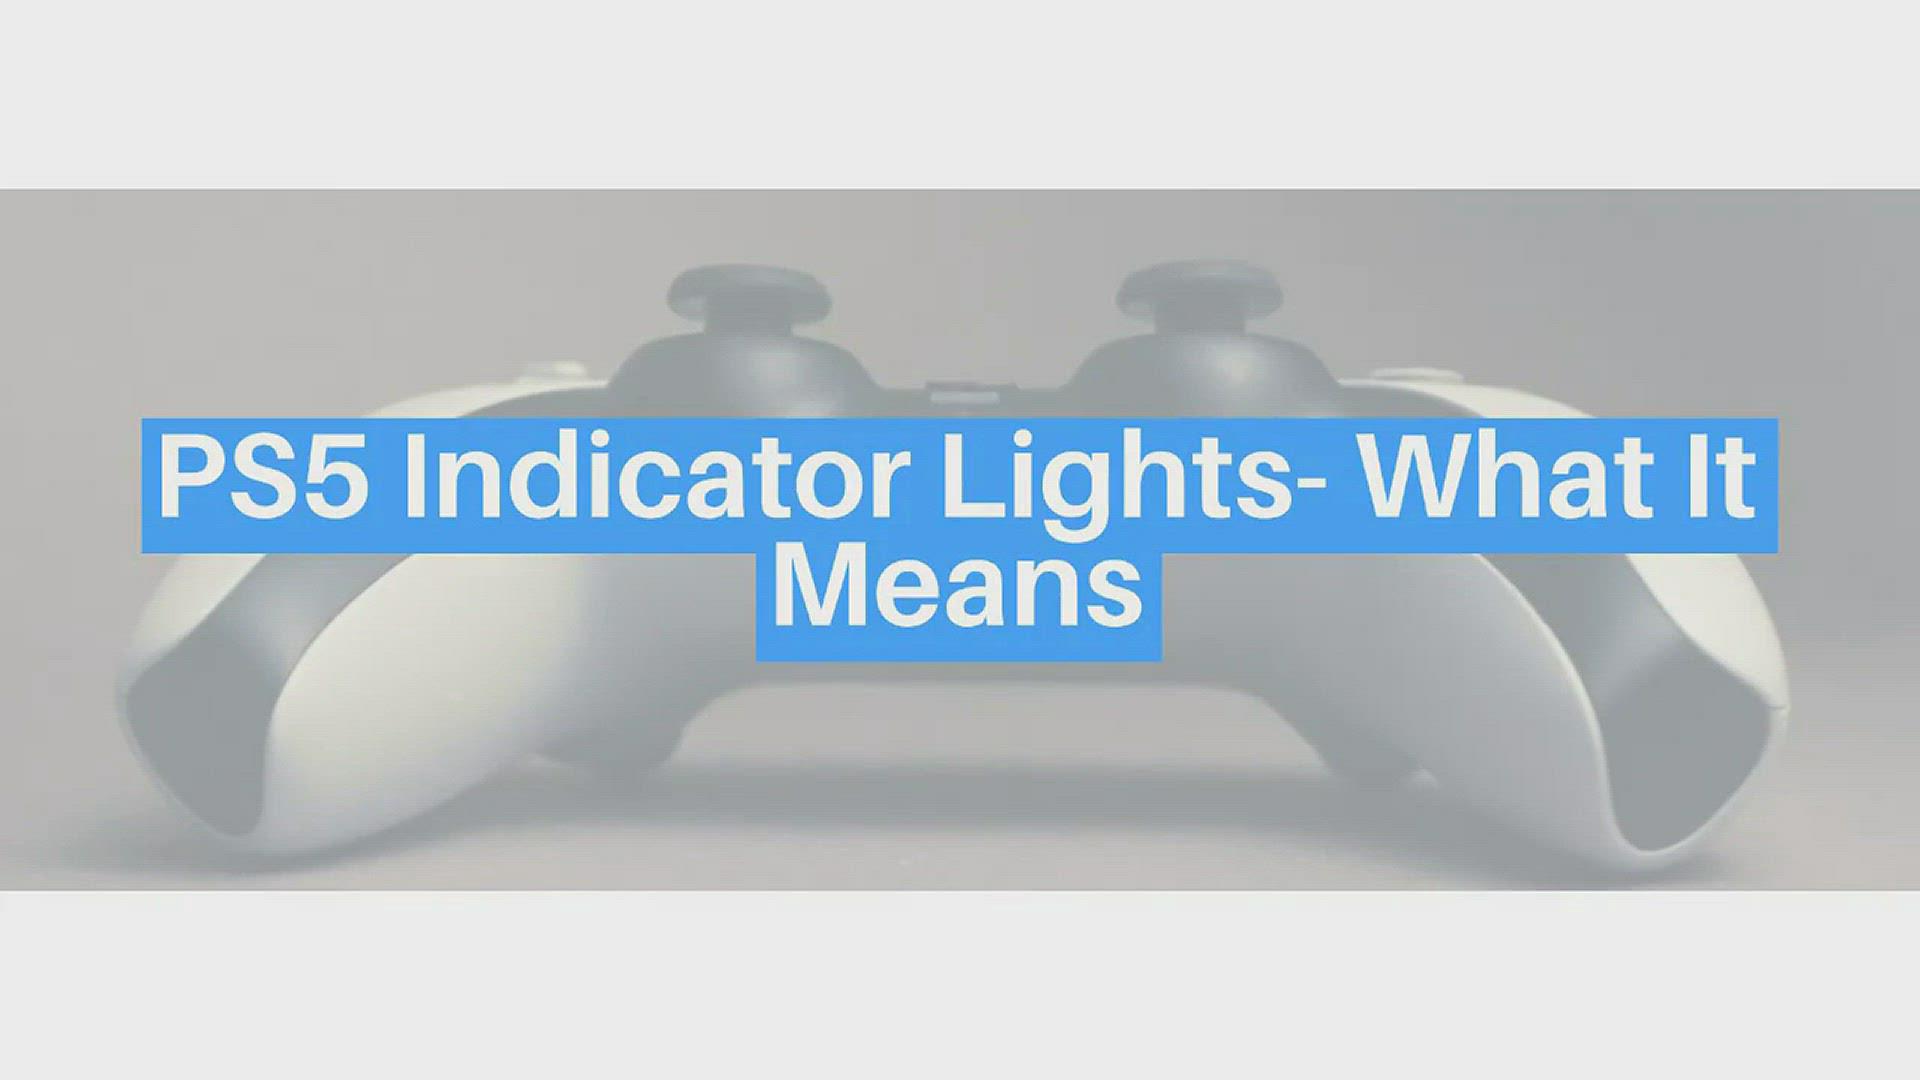 'Video thumbnail for PS5 Indicator Lights What Does It Mean'